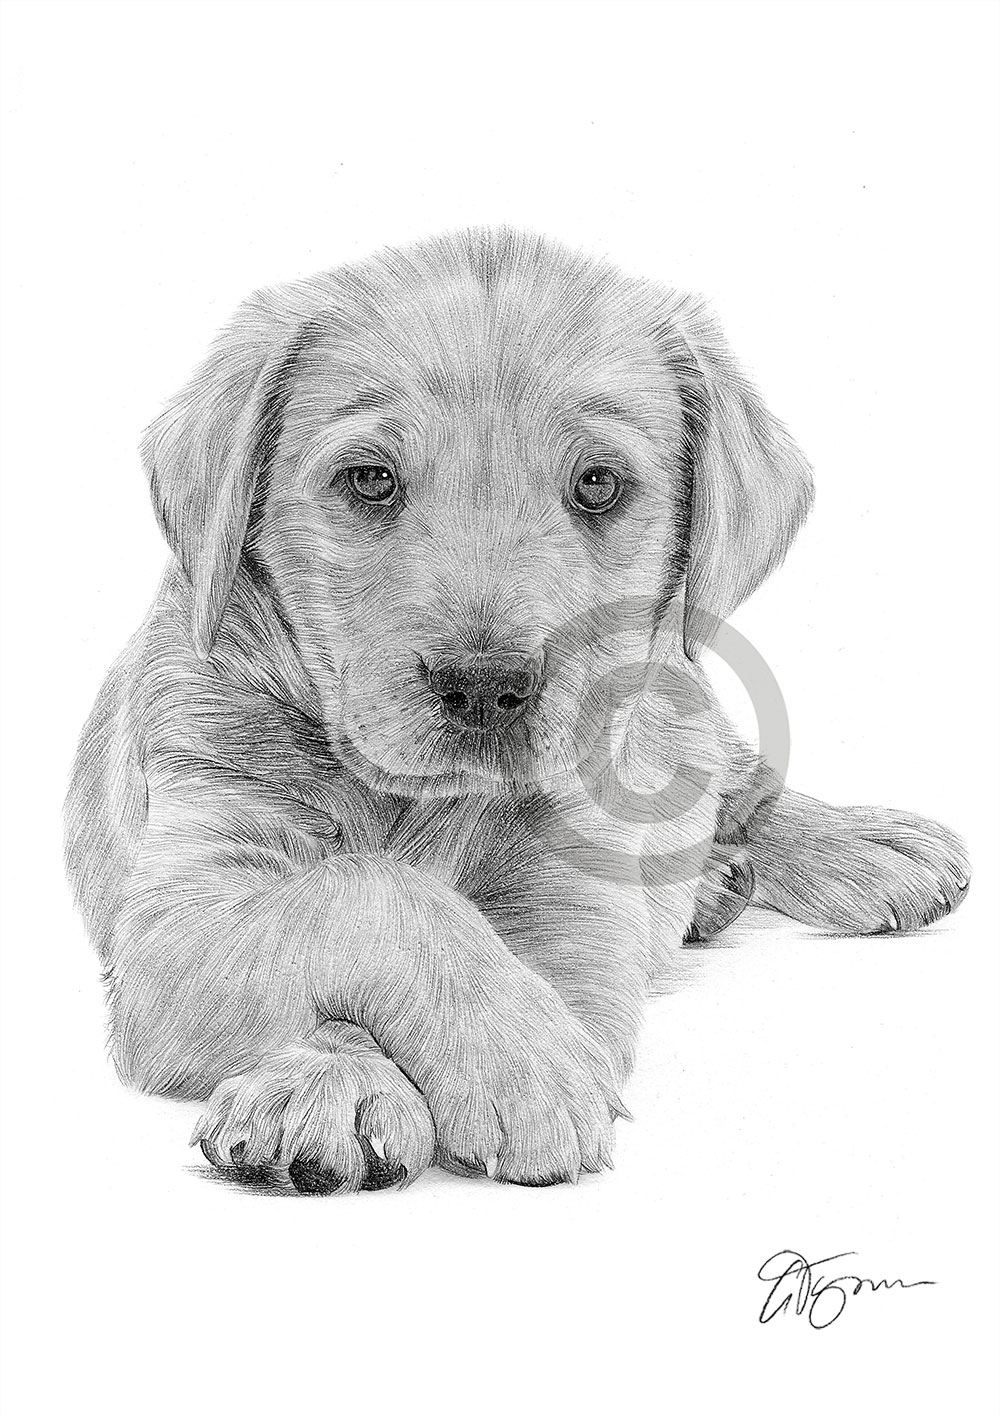 Pencil drawing of a young Labrador Retriever puppy by UK artist Gary Tymon